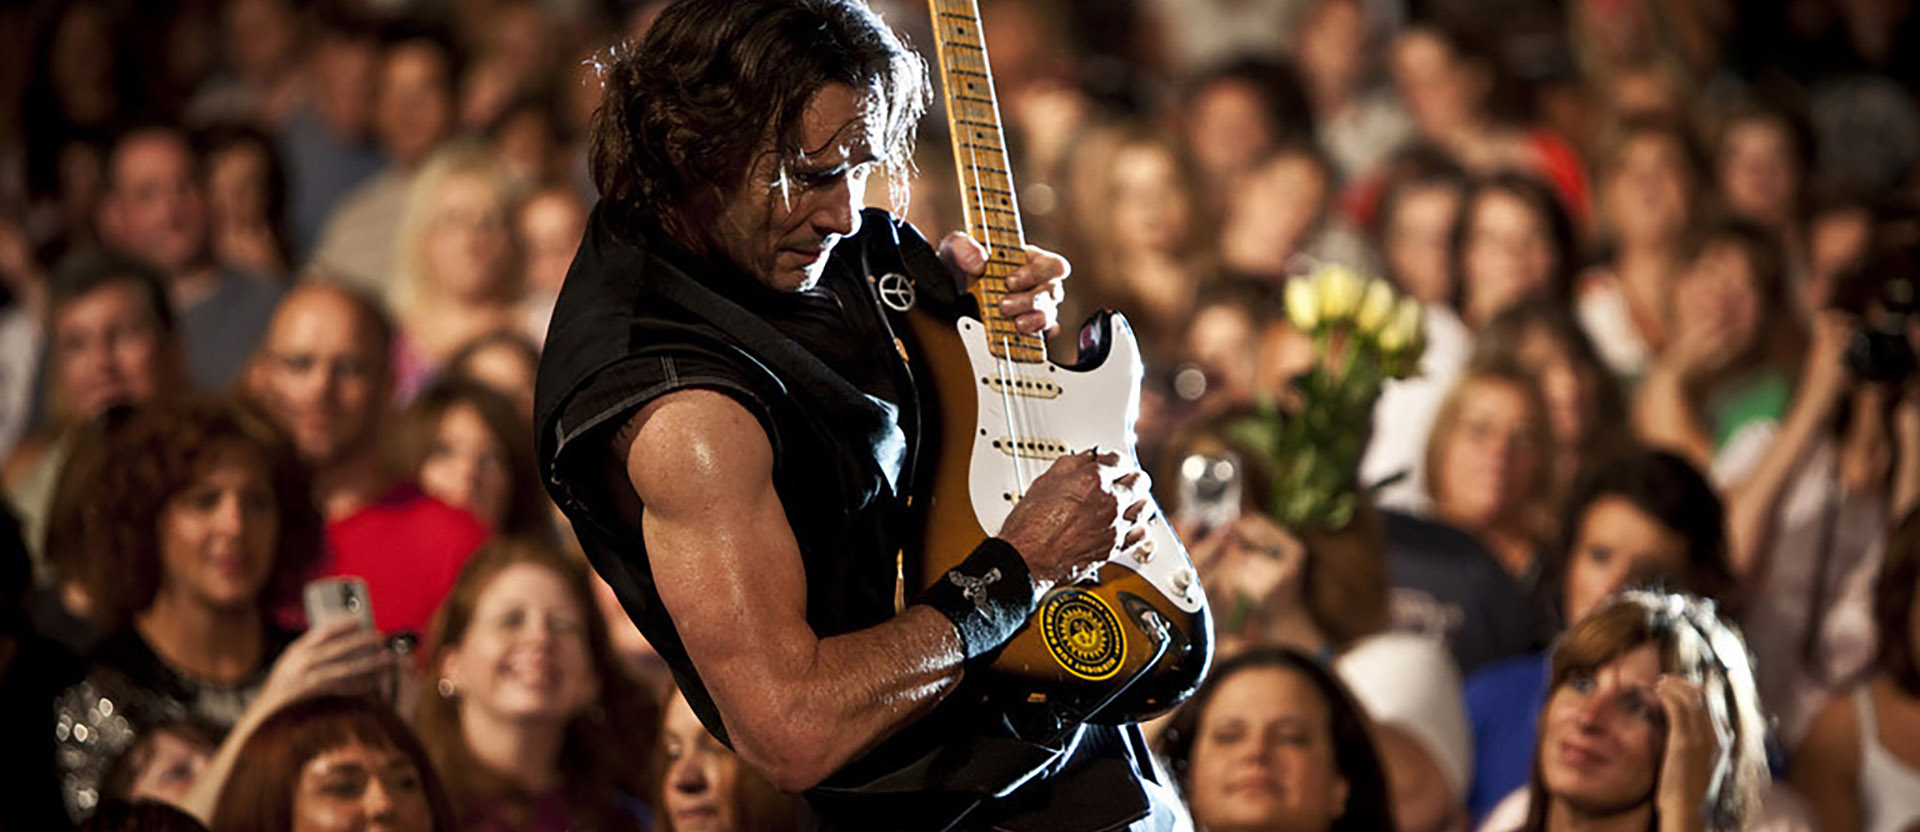 Rick Springfield on stage with crowd in background